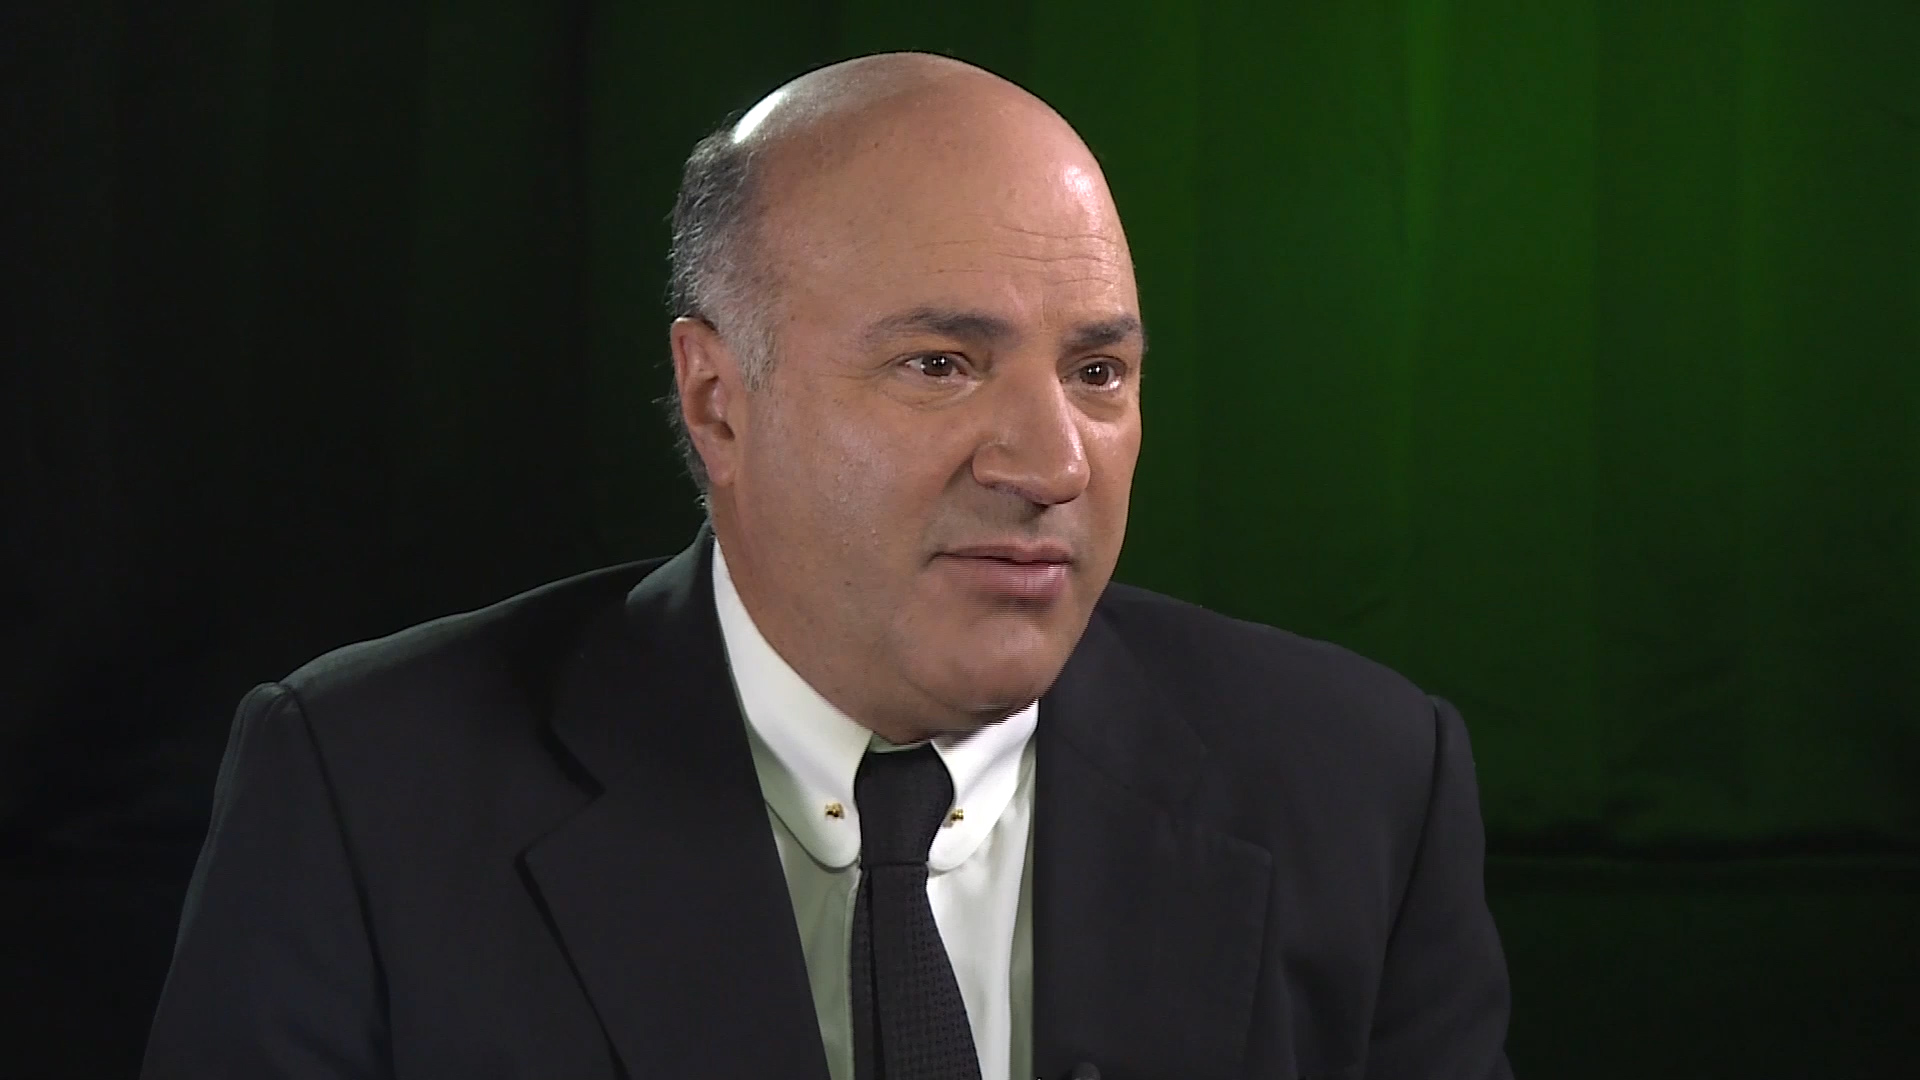 One more question for Shark Tank’s Kevin O’Leary on why he invests in women